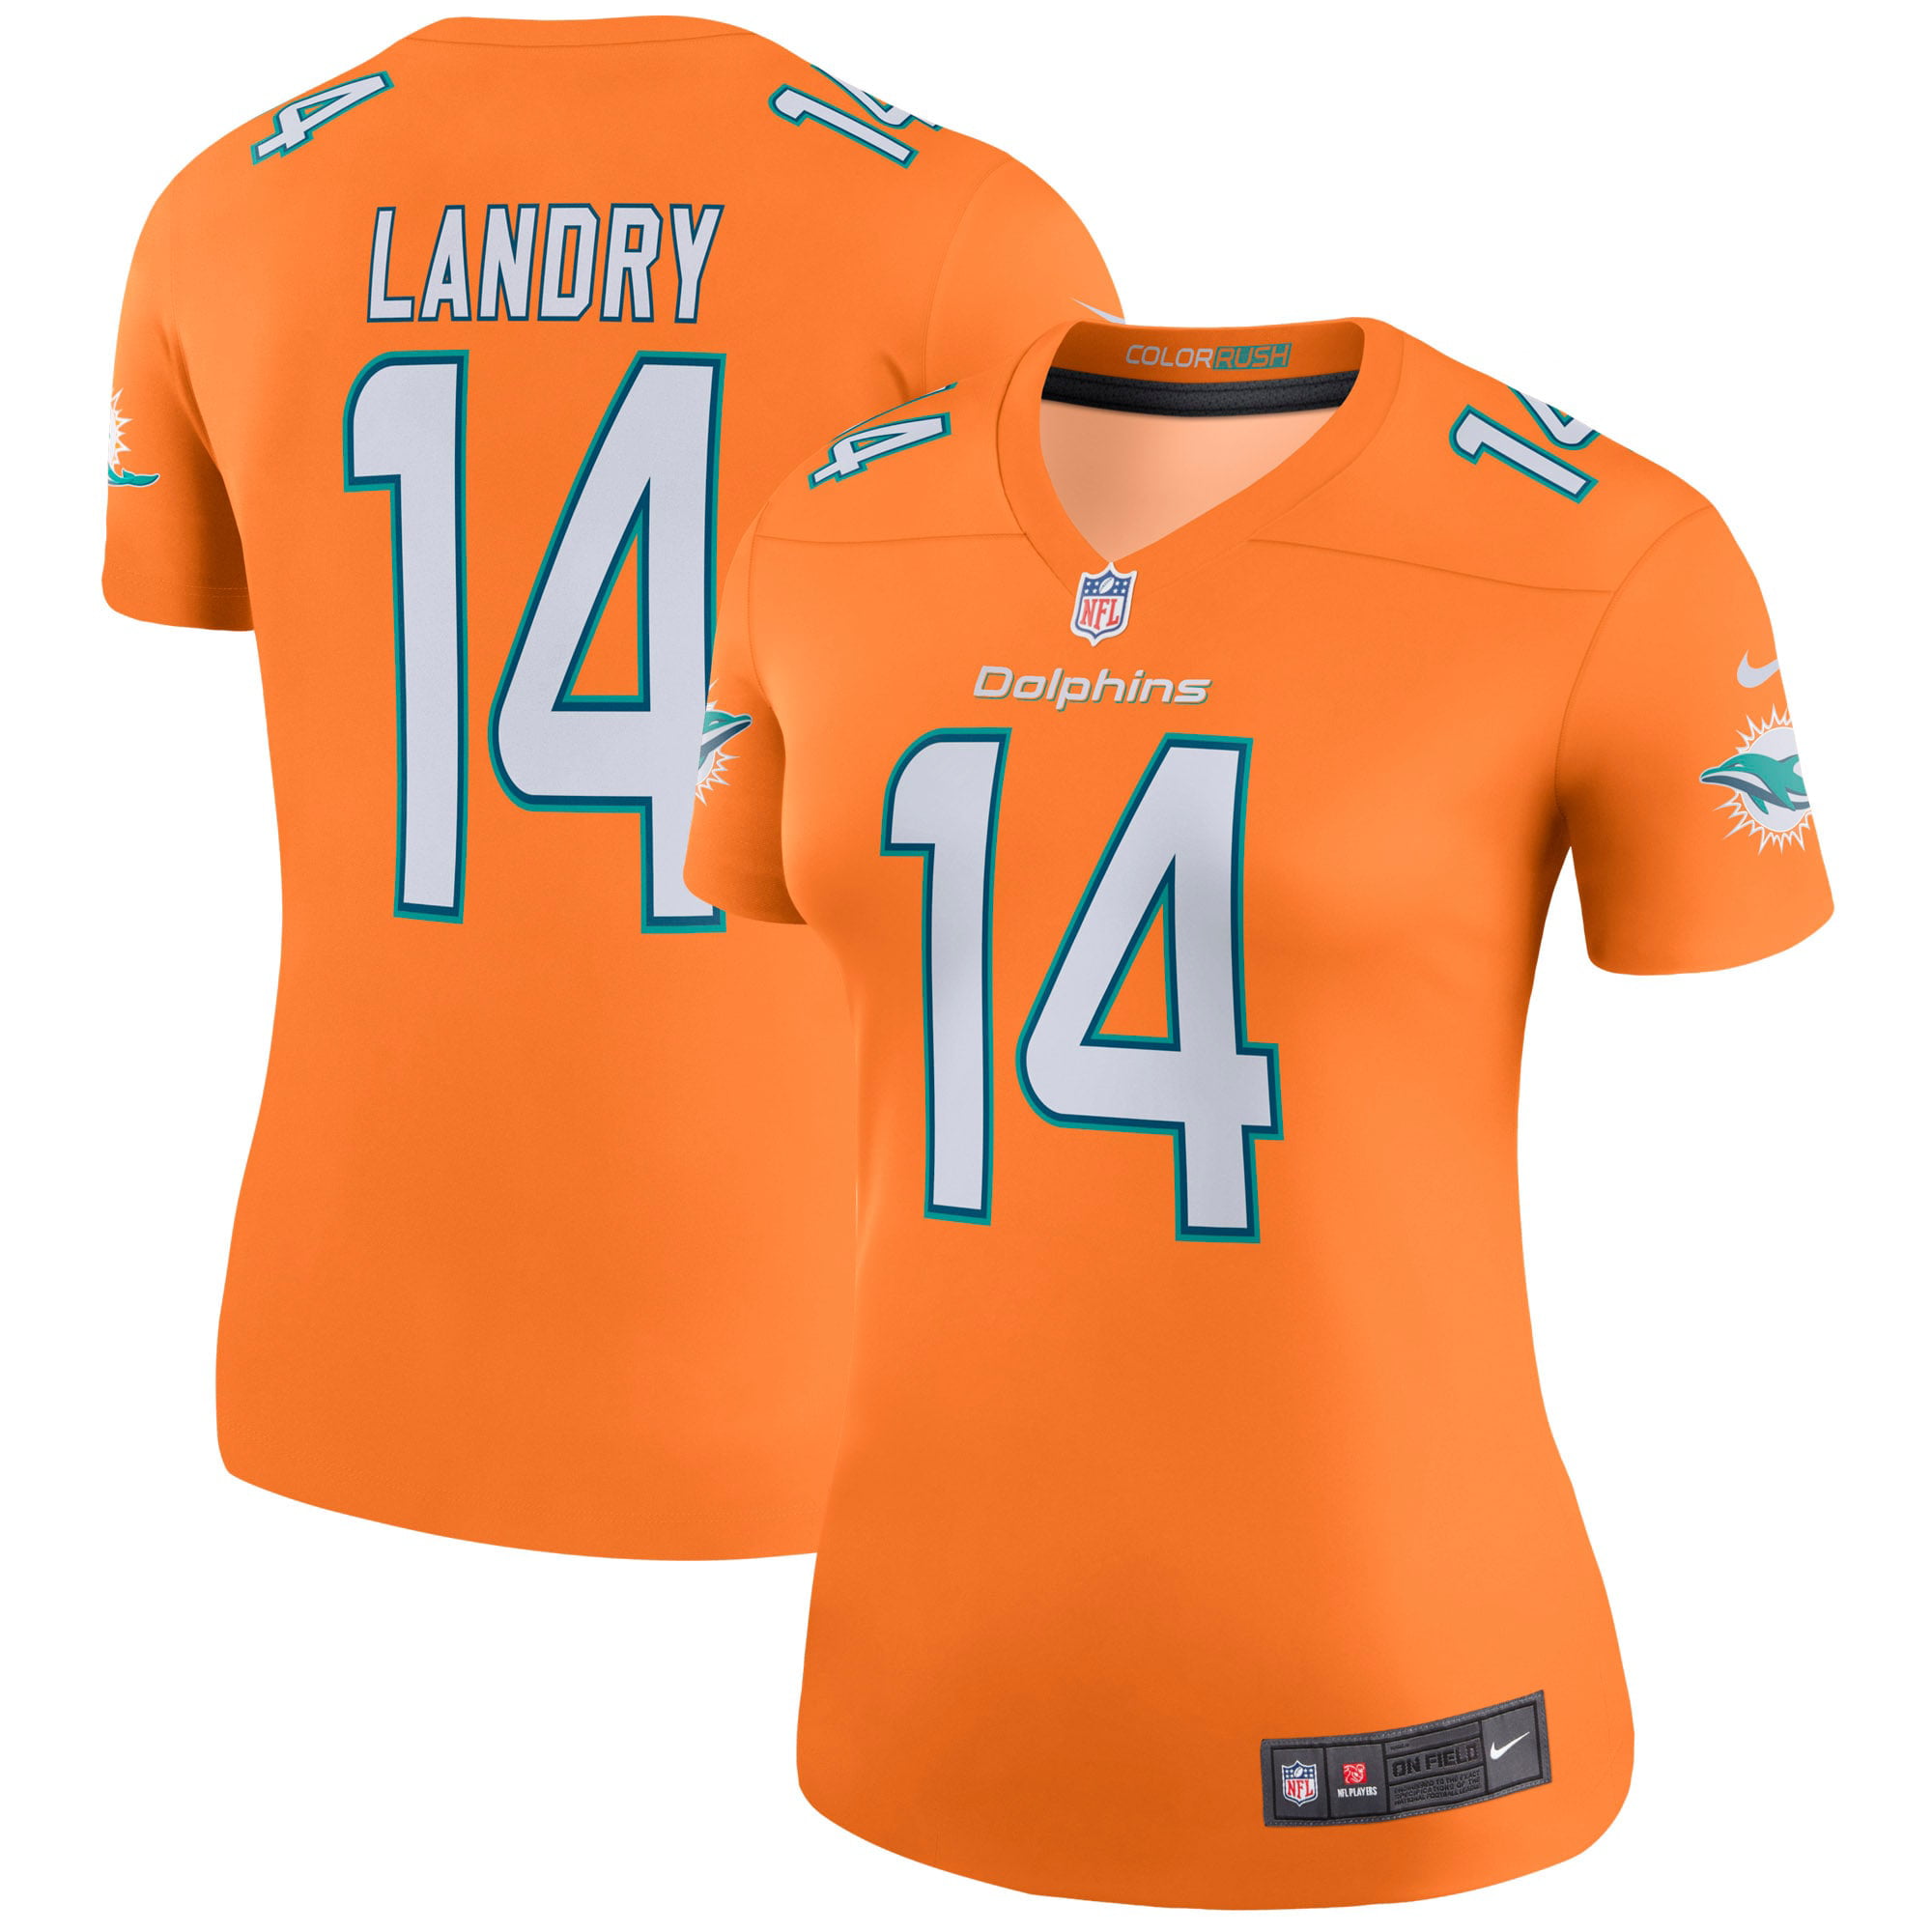 jarvis landry color rush jersey browns